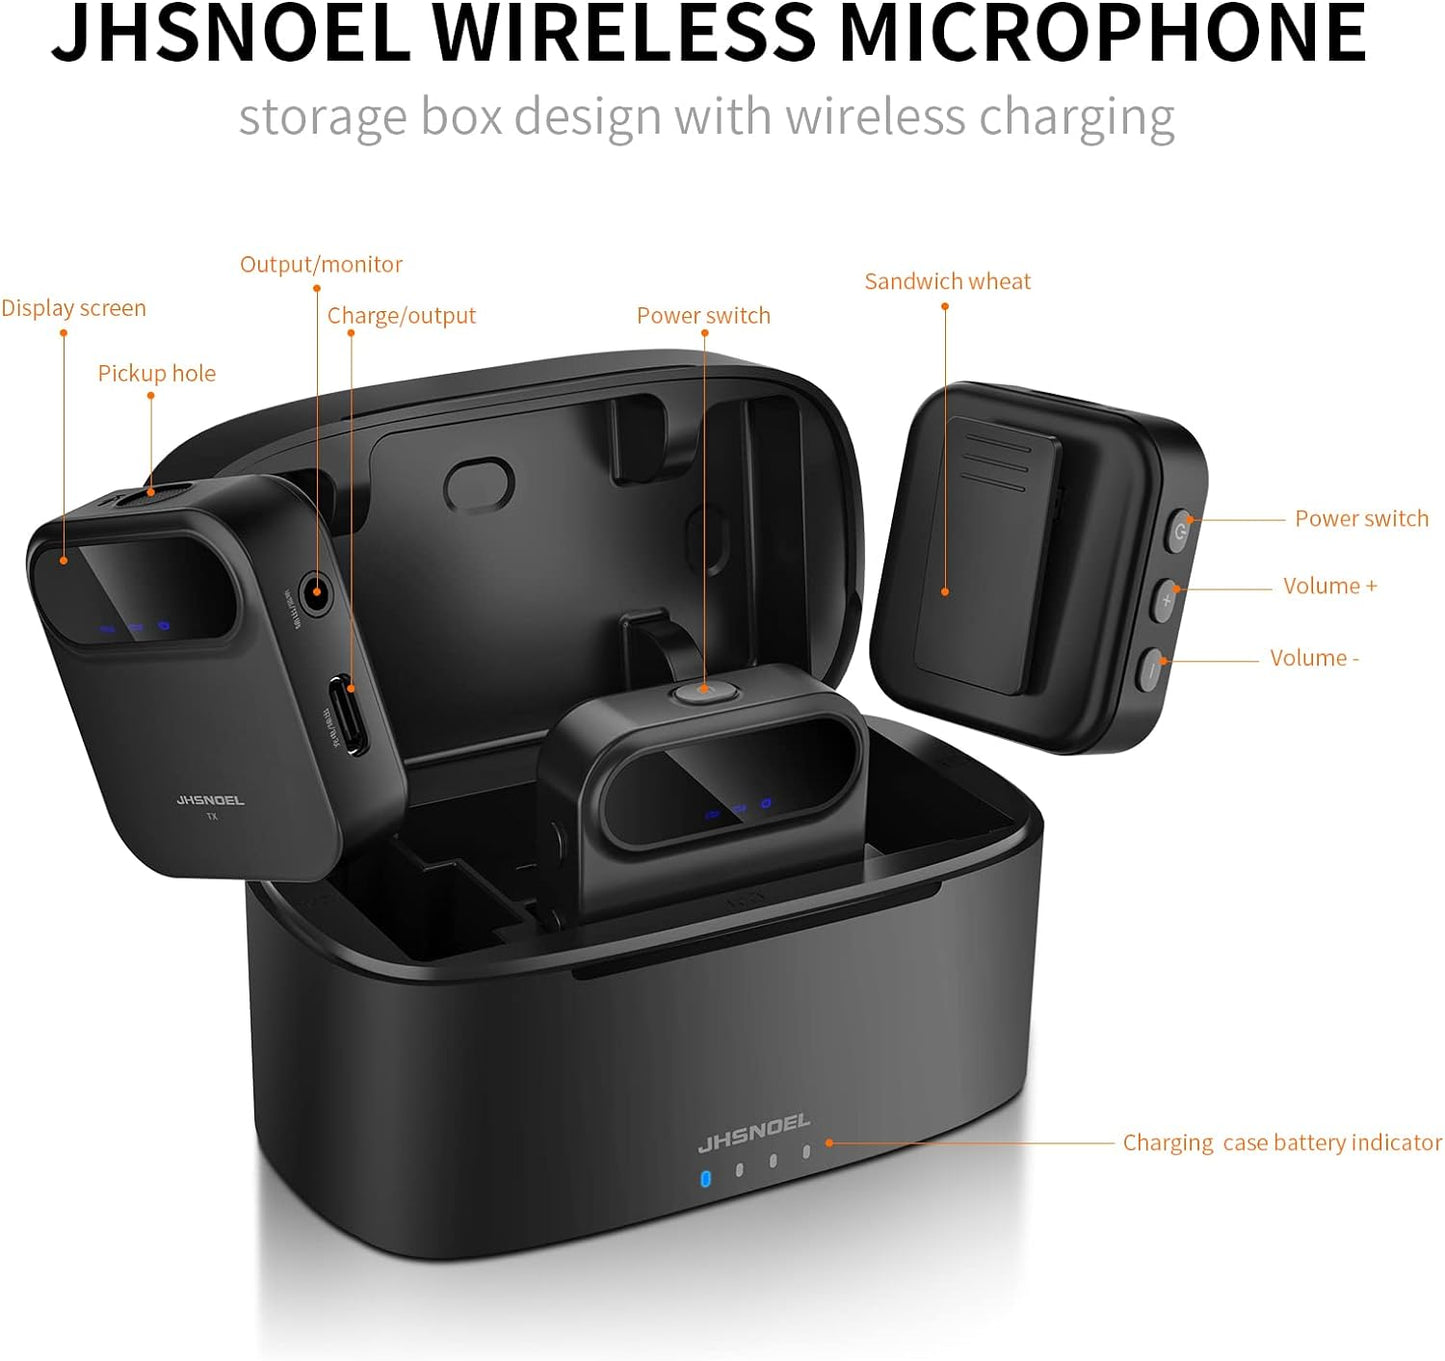 JHSNOEL Mic(2 TX+1 RX+Charging Case),Wireless Lavalier Microphone,20Hr Battery,Strong Noise Cancellation,Lapel Wireless Microphone for DSLR Cameras/PC/iPhone/Andriod/Recording Interview/V